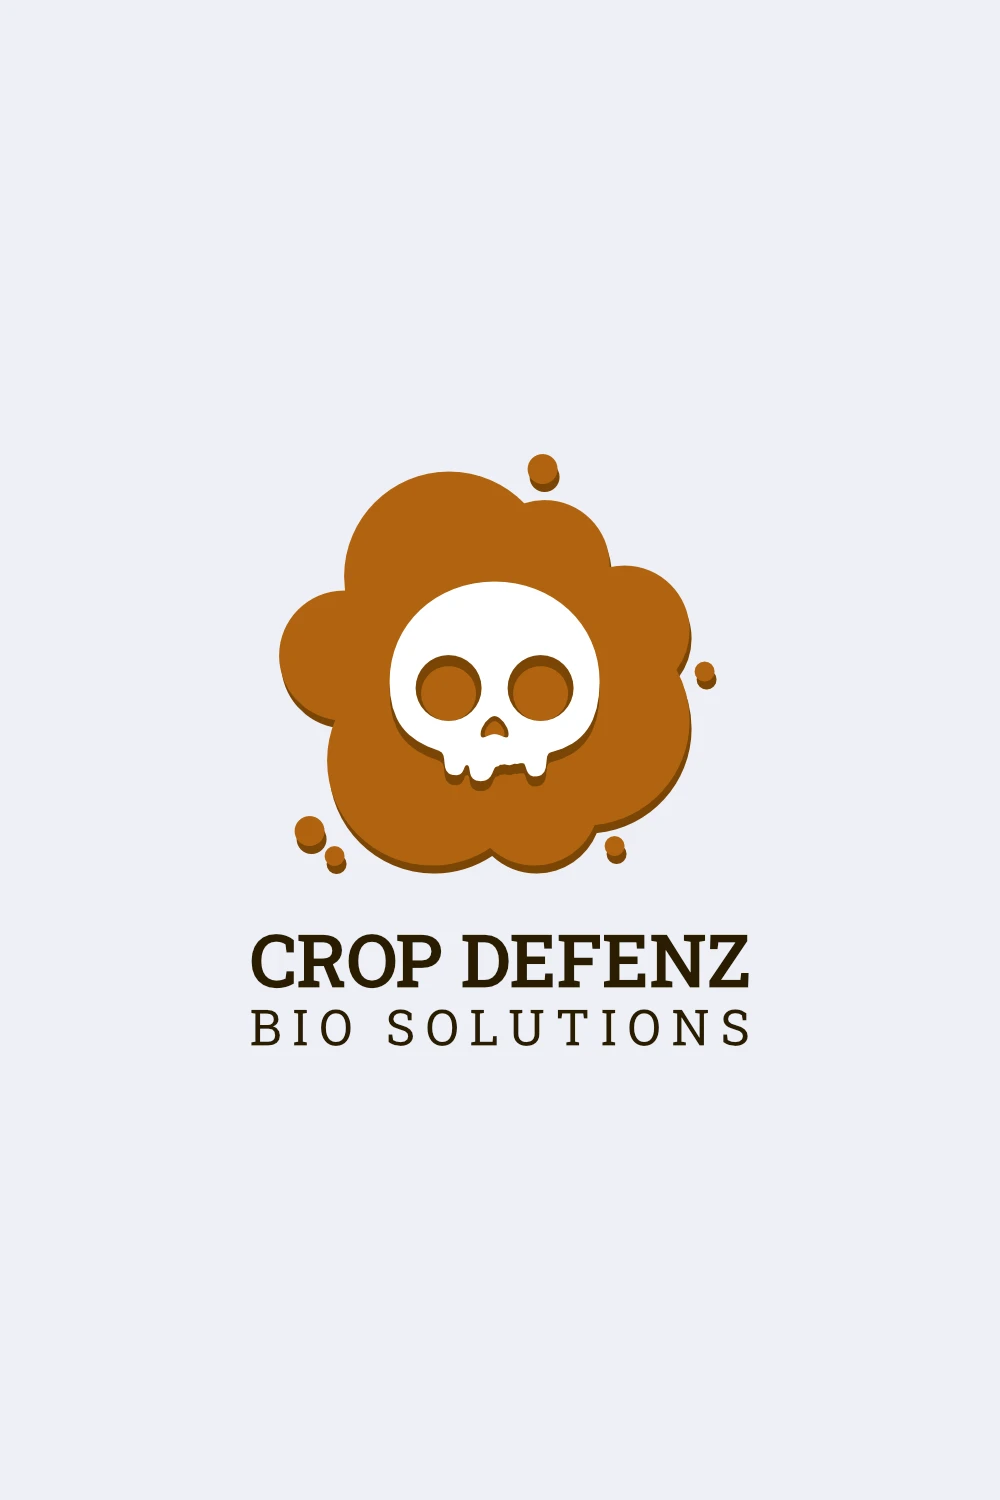 Example on how to Create a Memorable and Recognizable Logo Design. A brown cloud with a skull in the middle and the text "Crop Defenz Bio Solutions"